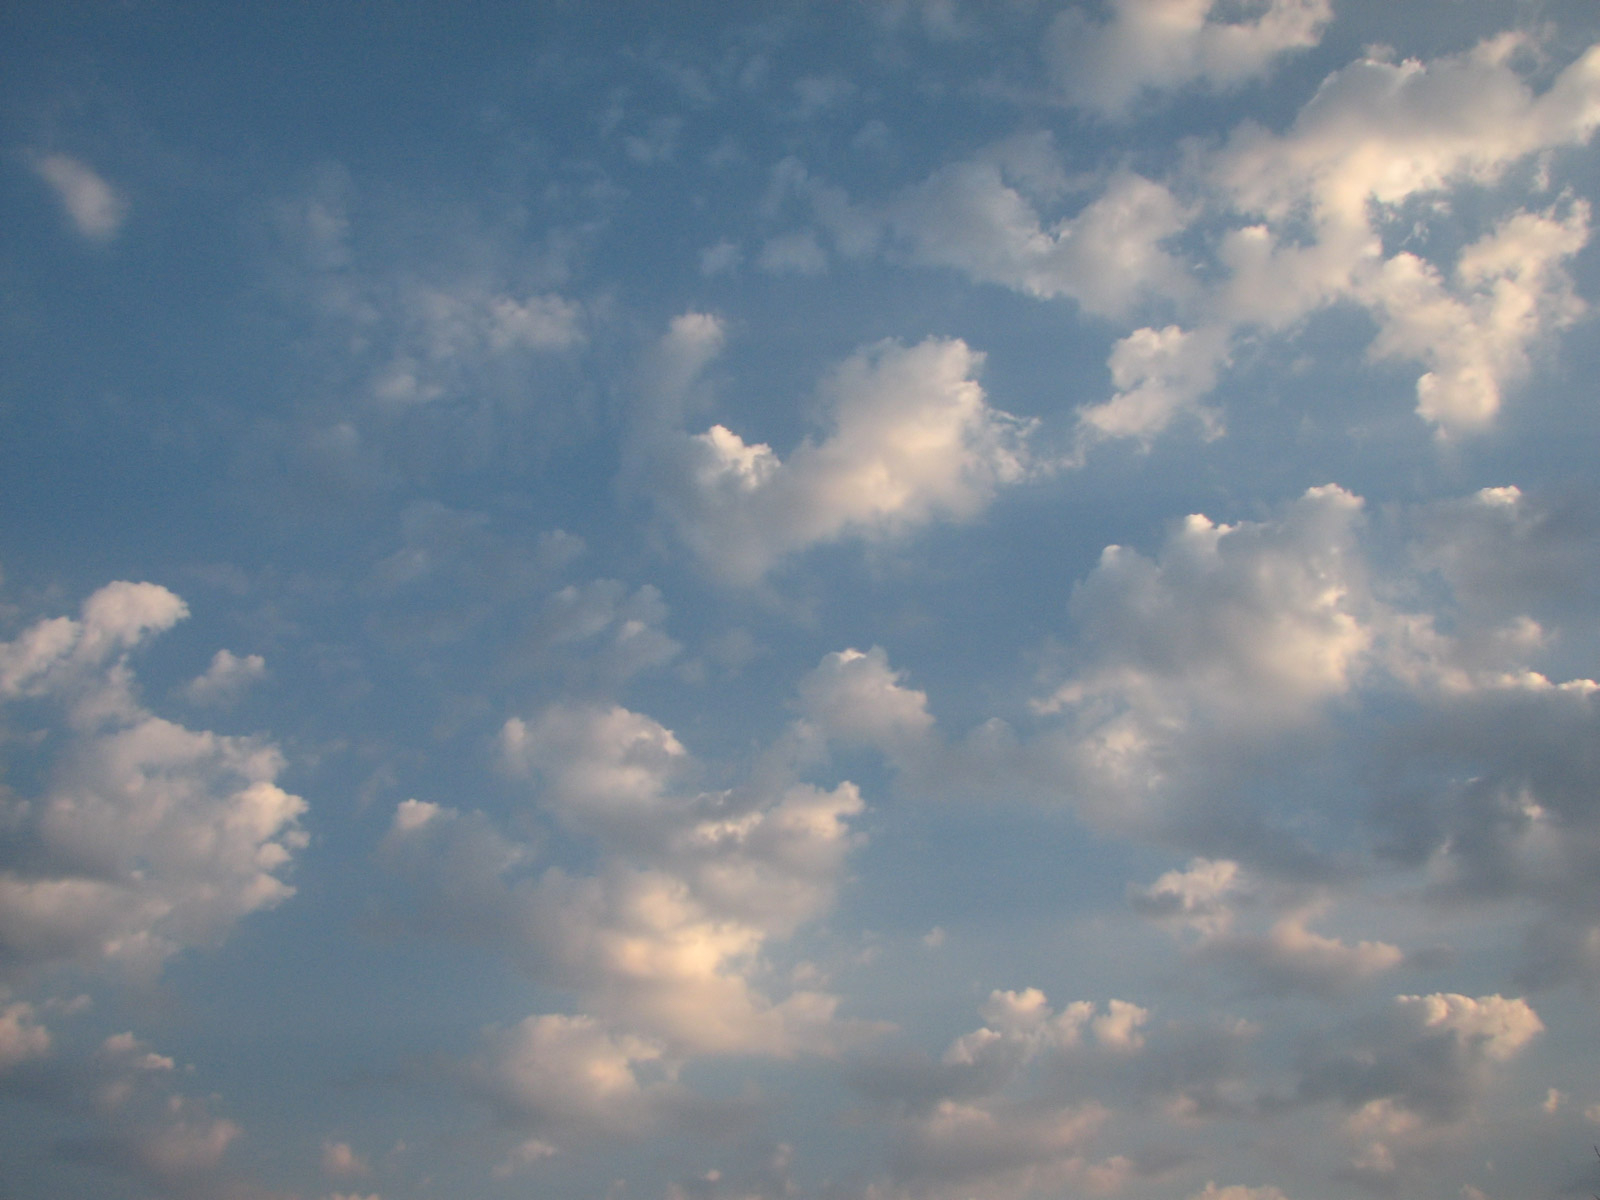 Clouds-37 by 